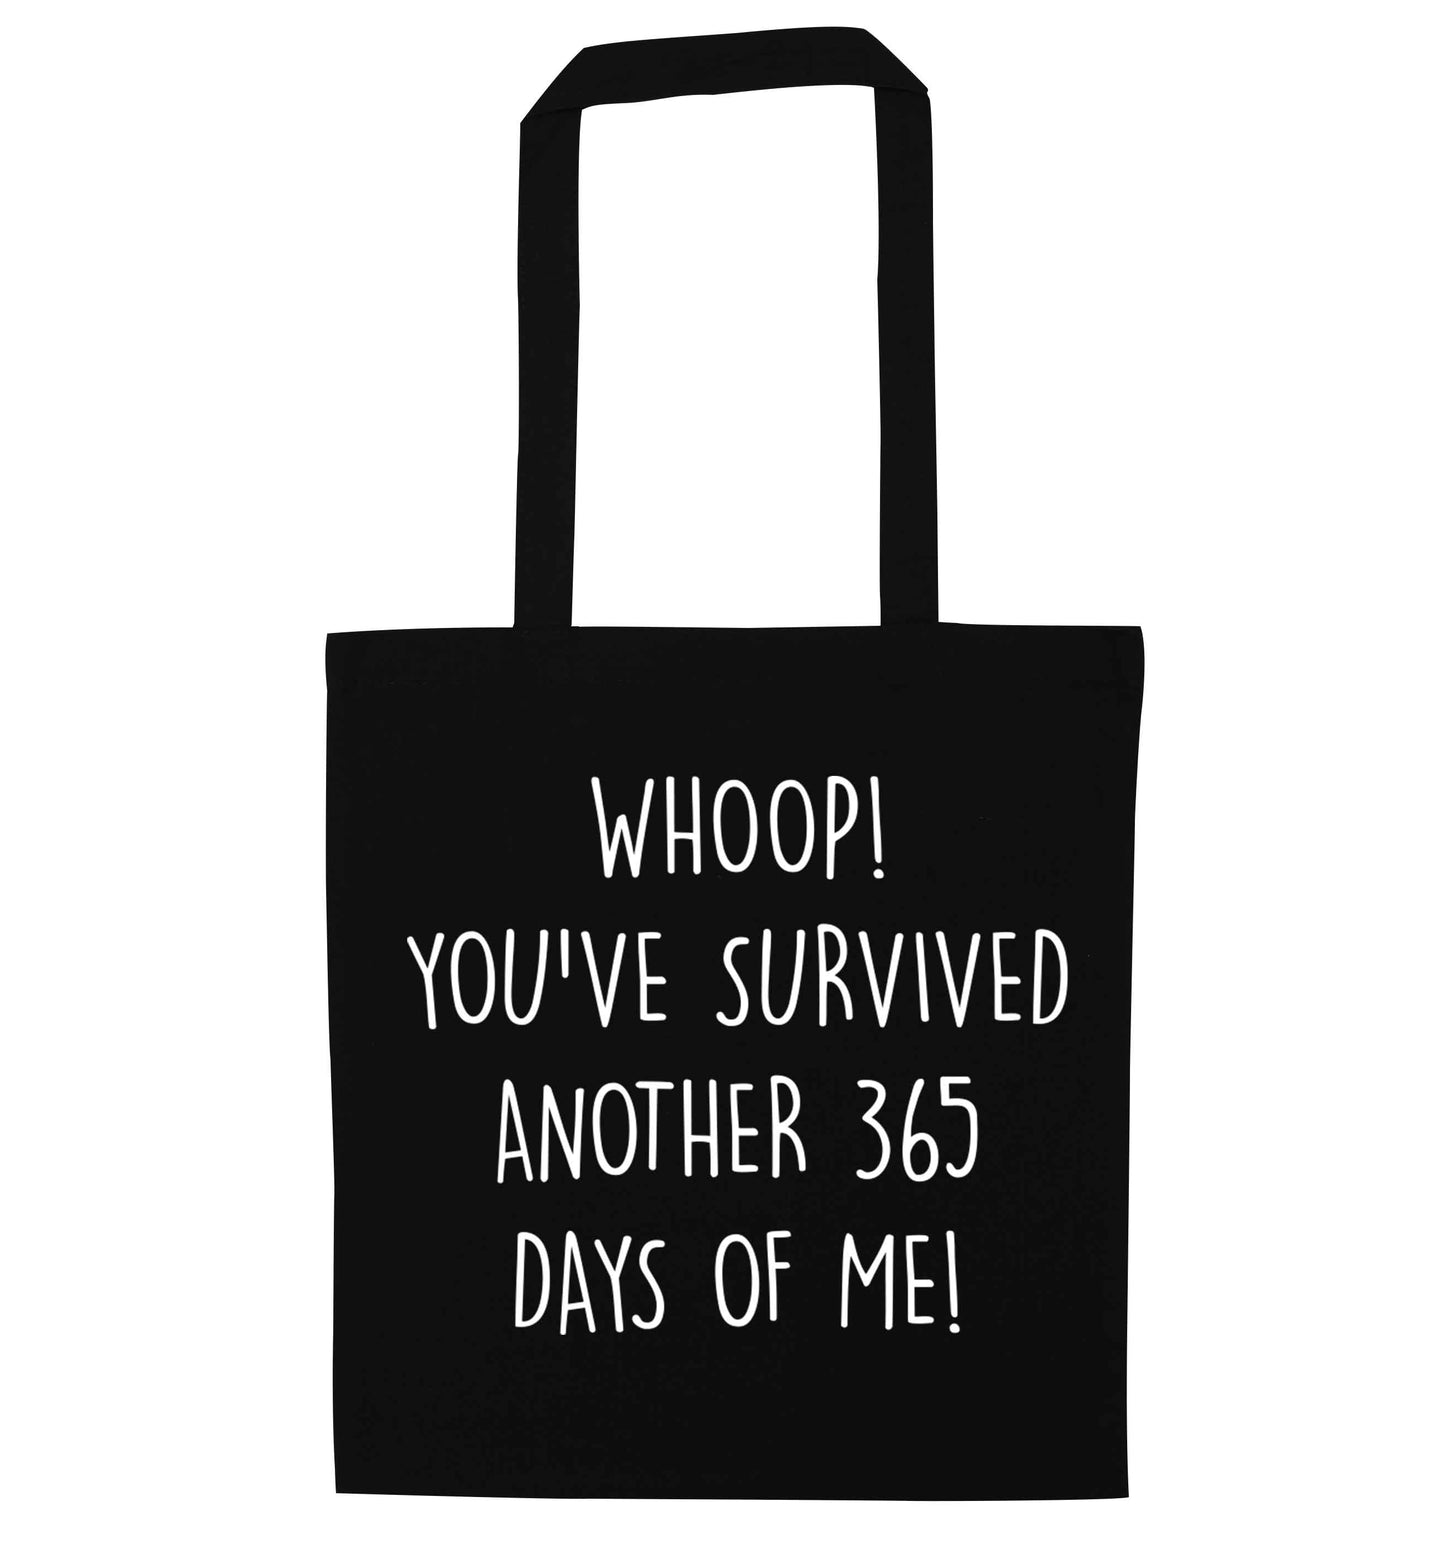 Whoop! You've survived another 365 days with me! black tote bag